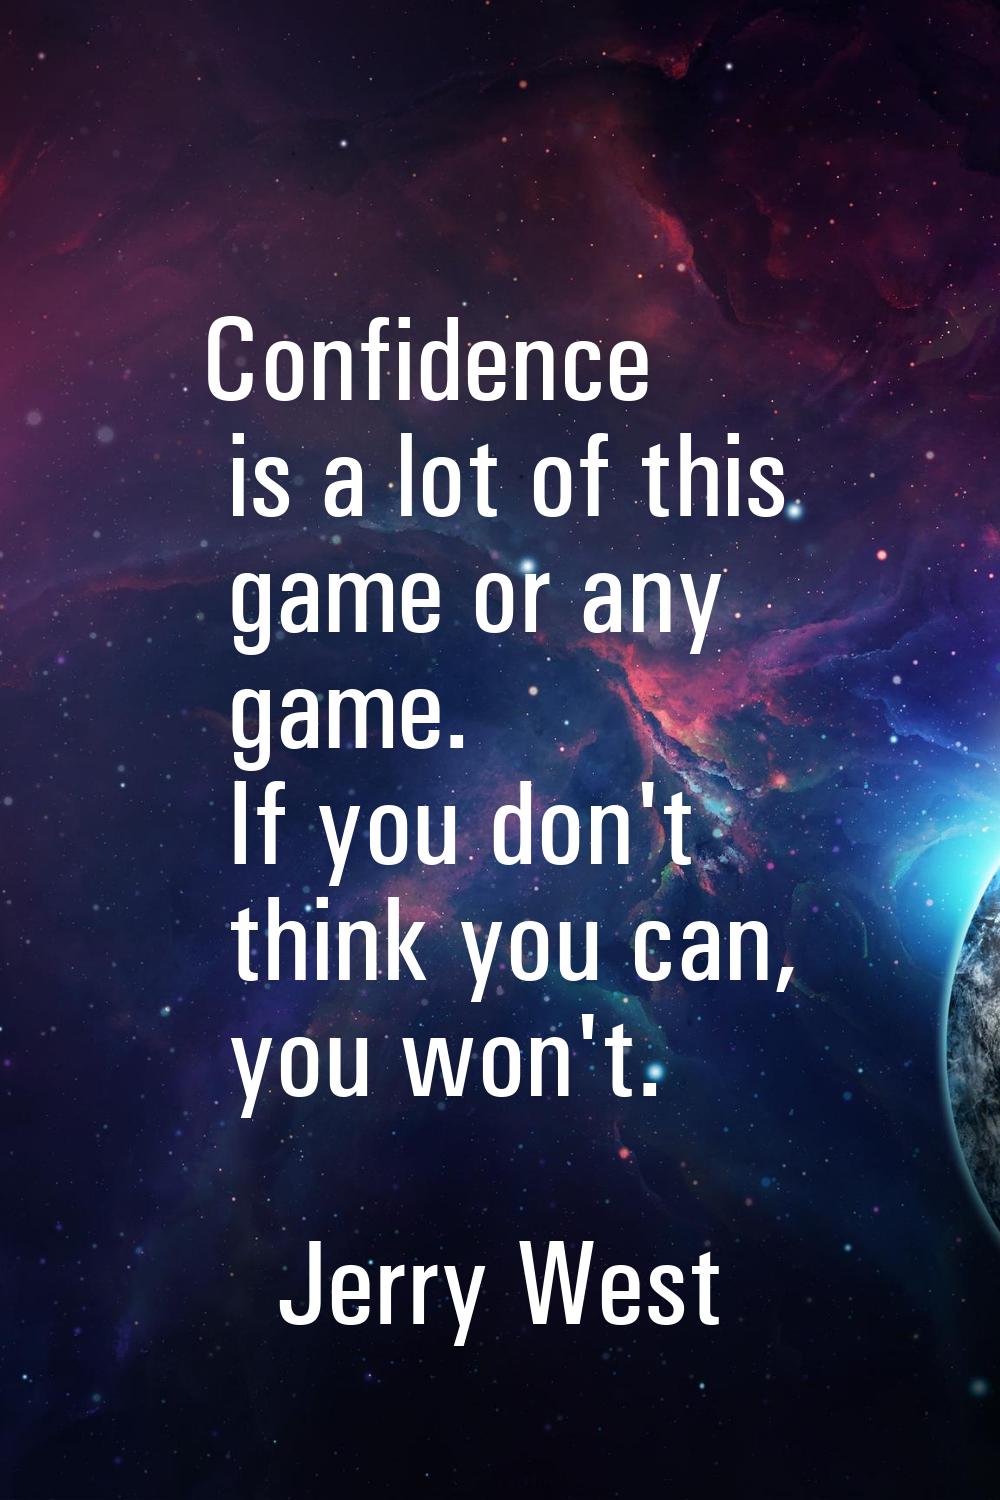 Confidence is a lot of this game or any game. If you don't think you can, you won't.